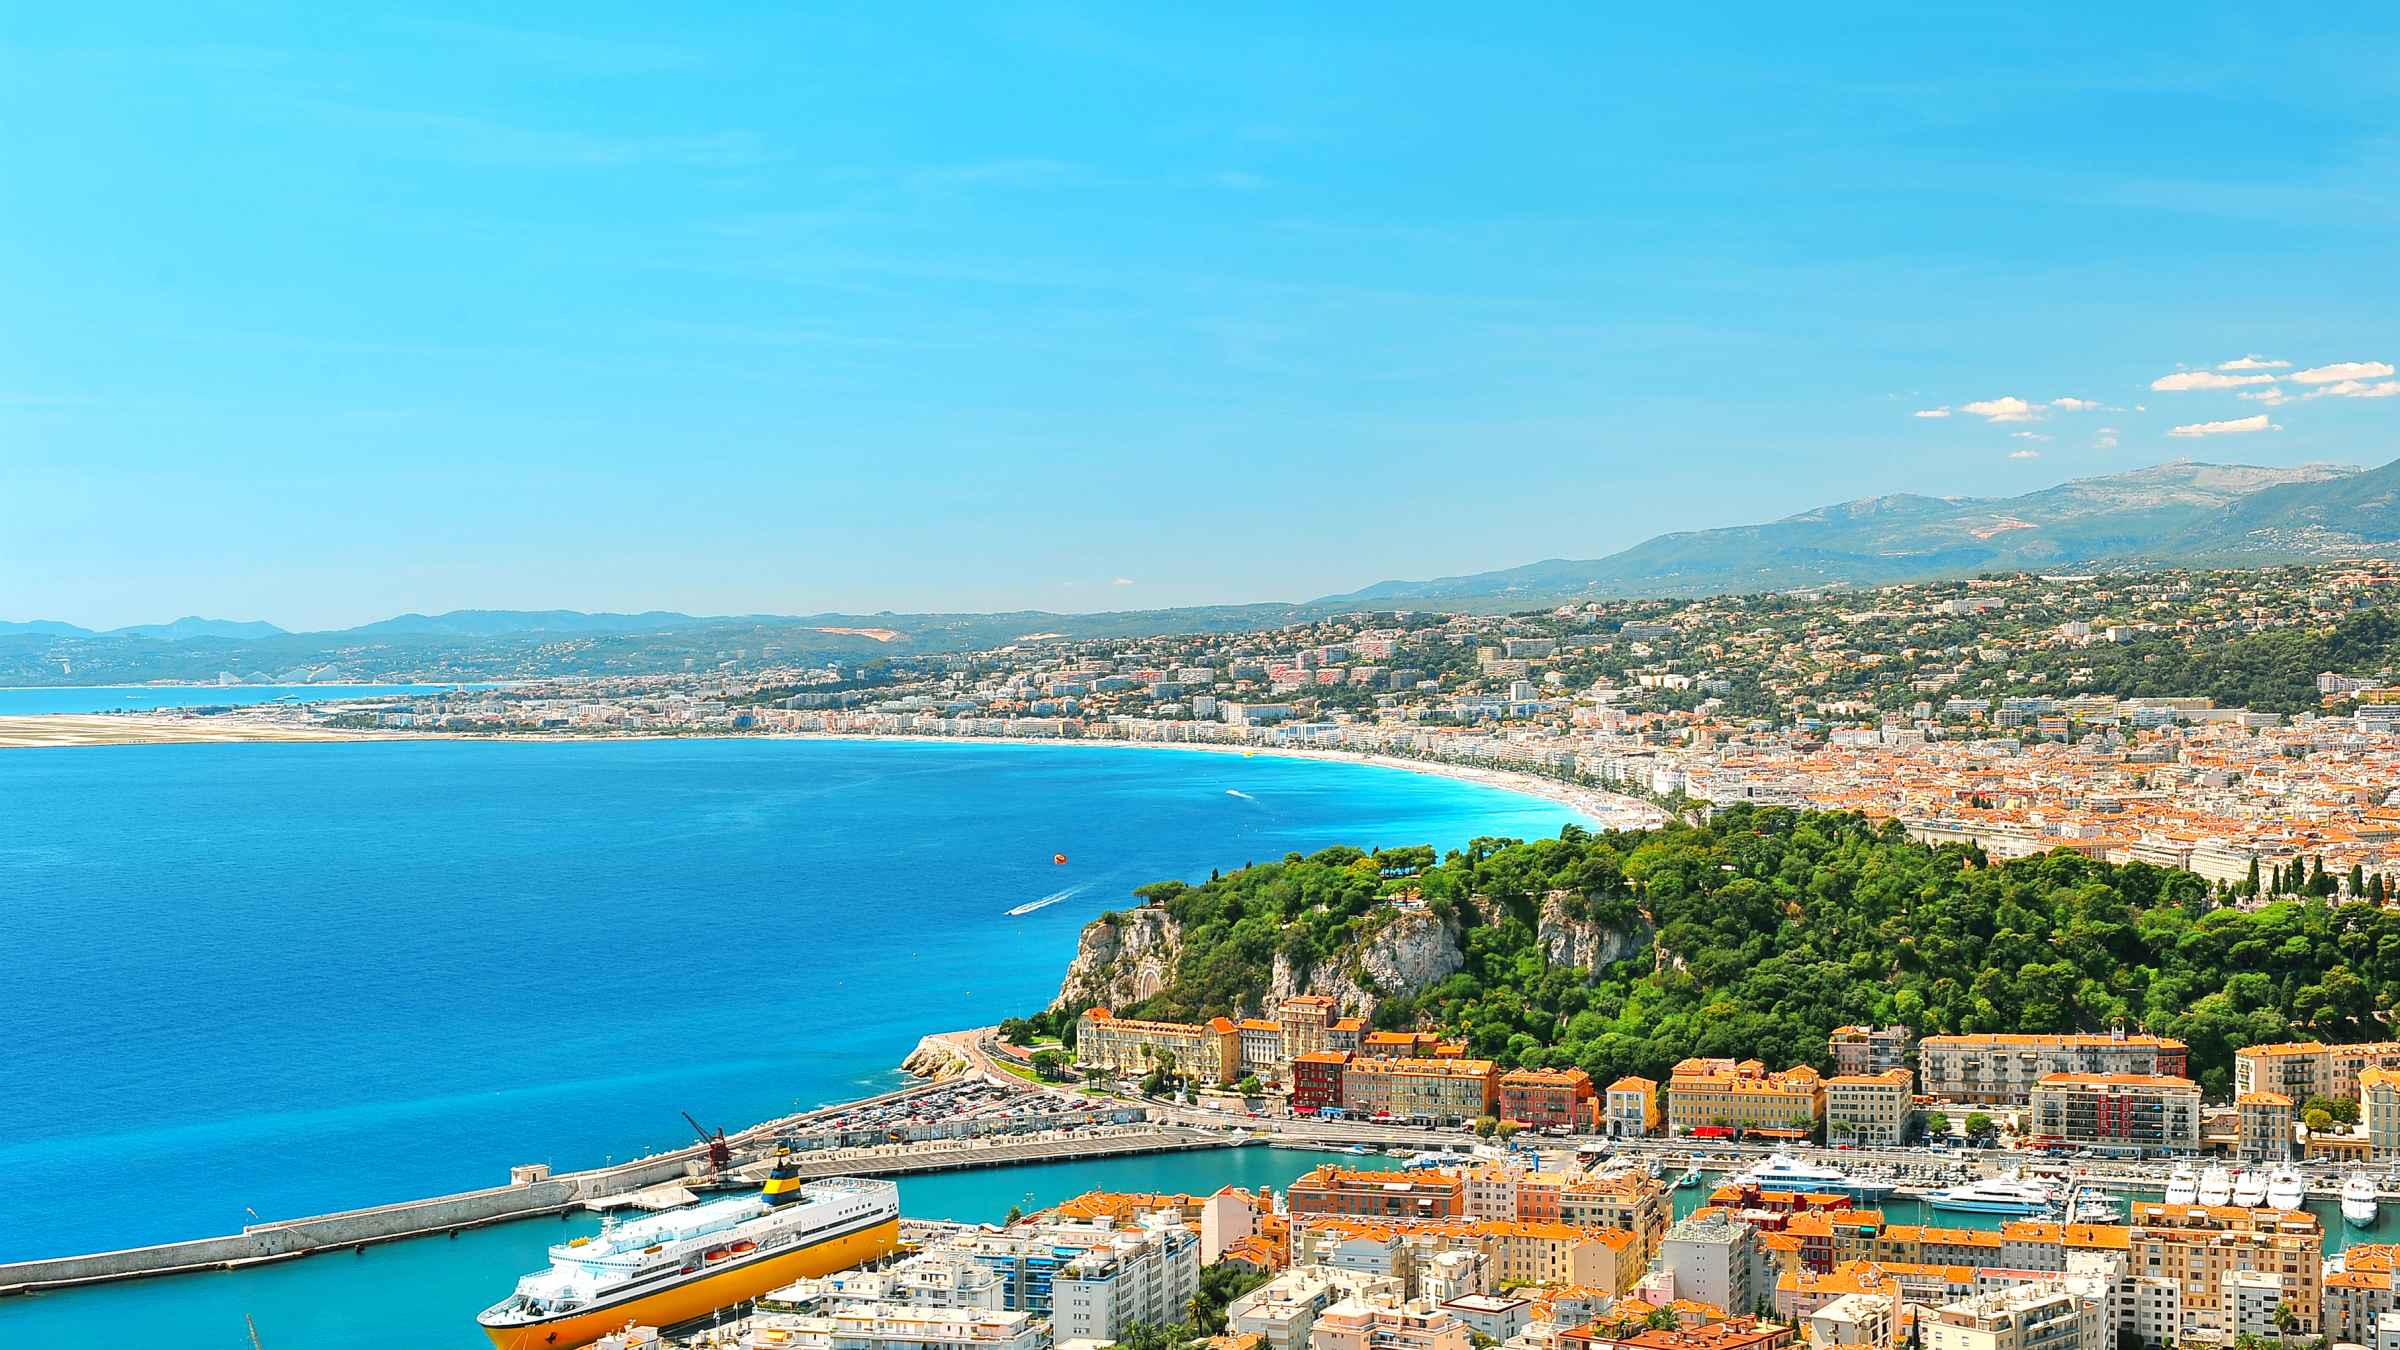 French Riviera 2021: Top 10 Tours & Activities (with Photos) - Things